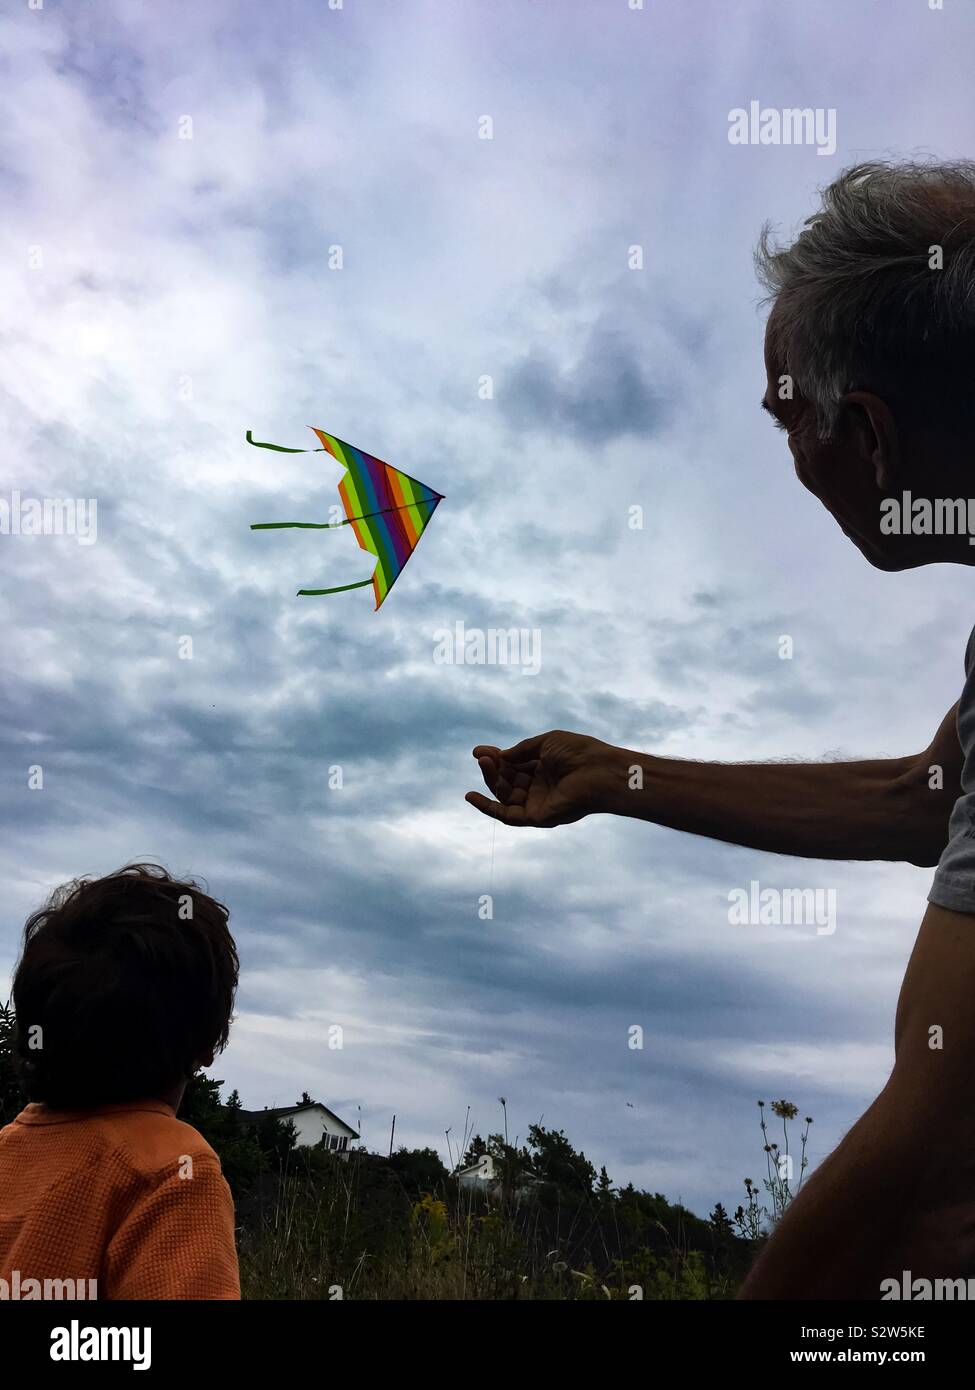 Old and young flying a kite Stock Photo